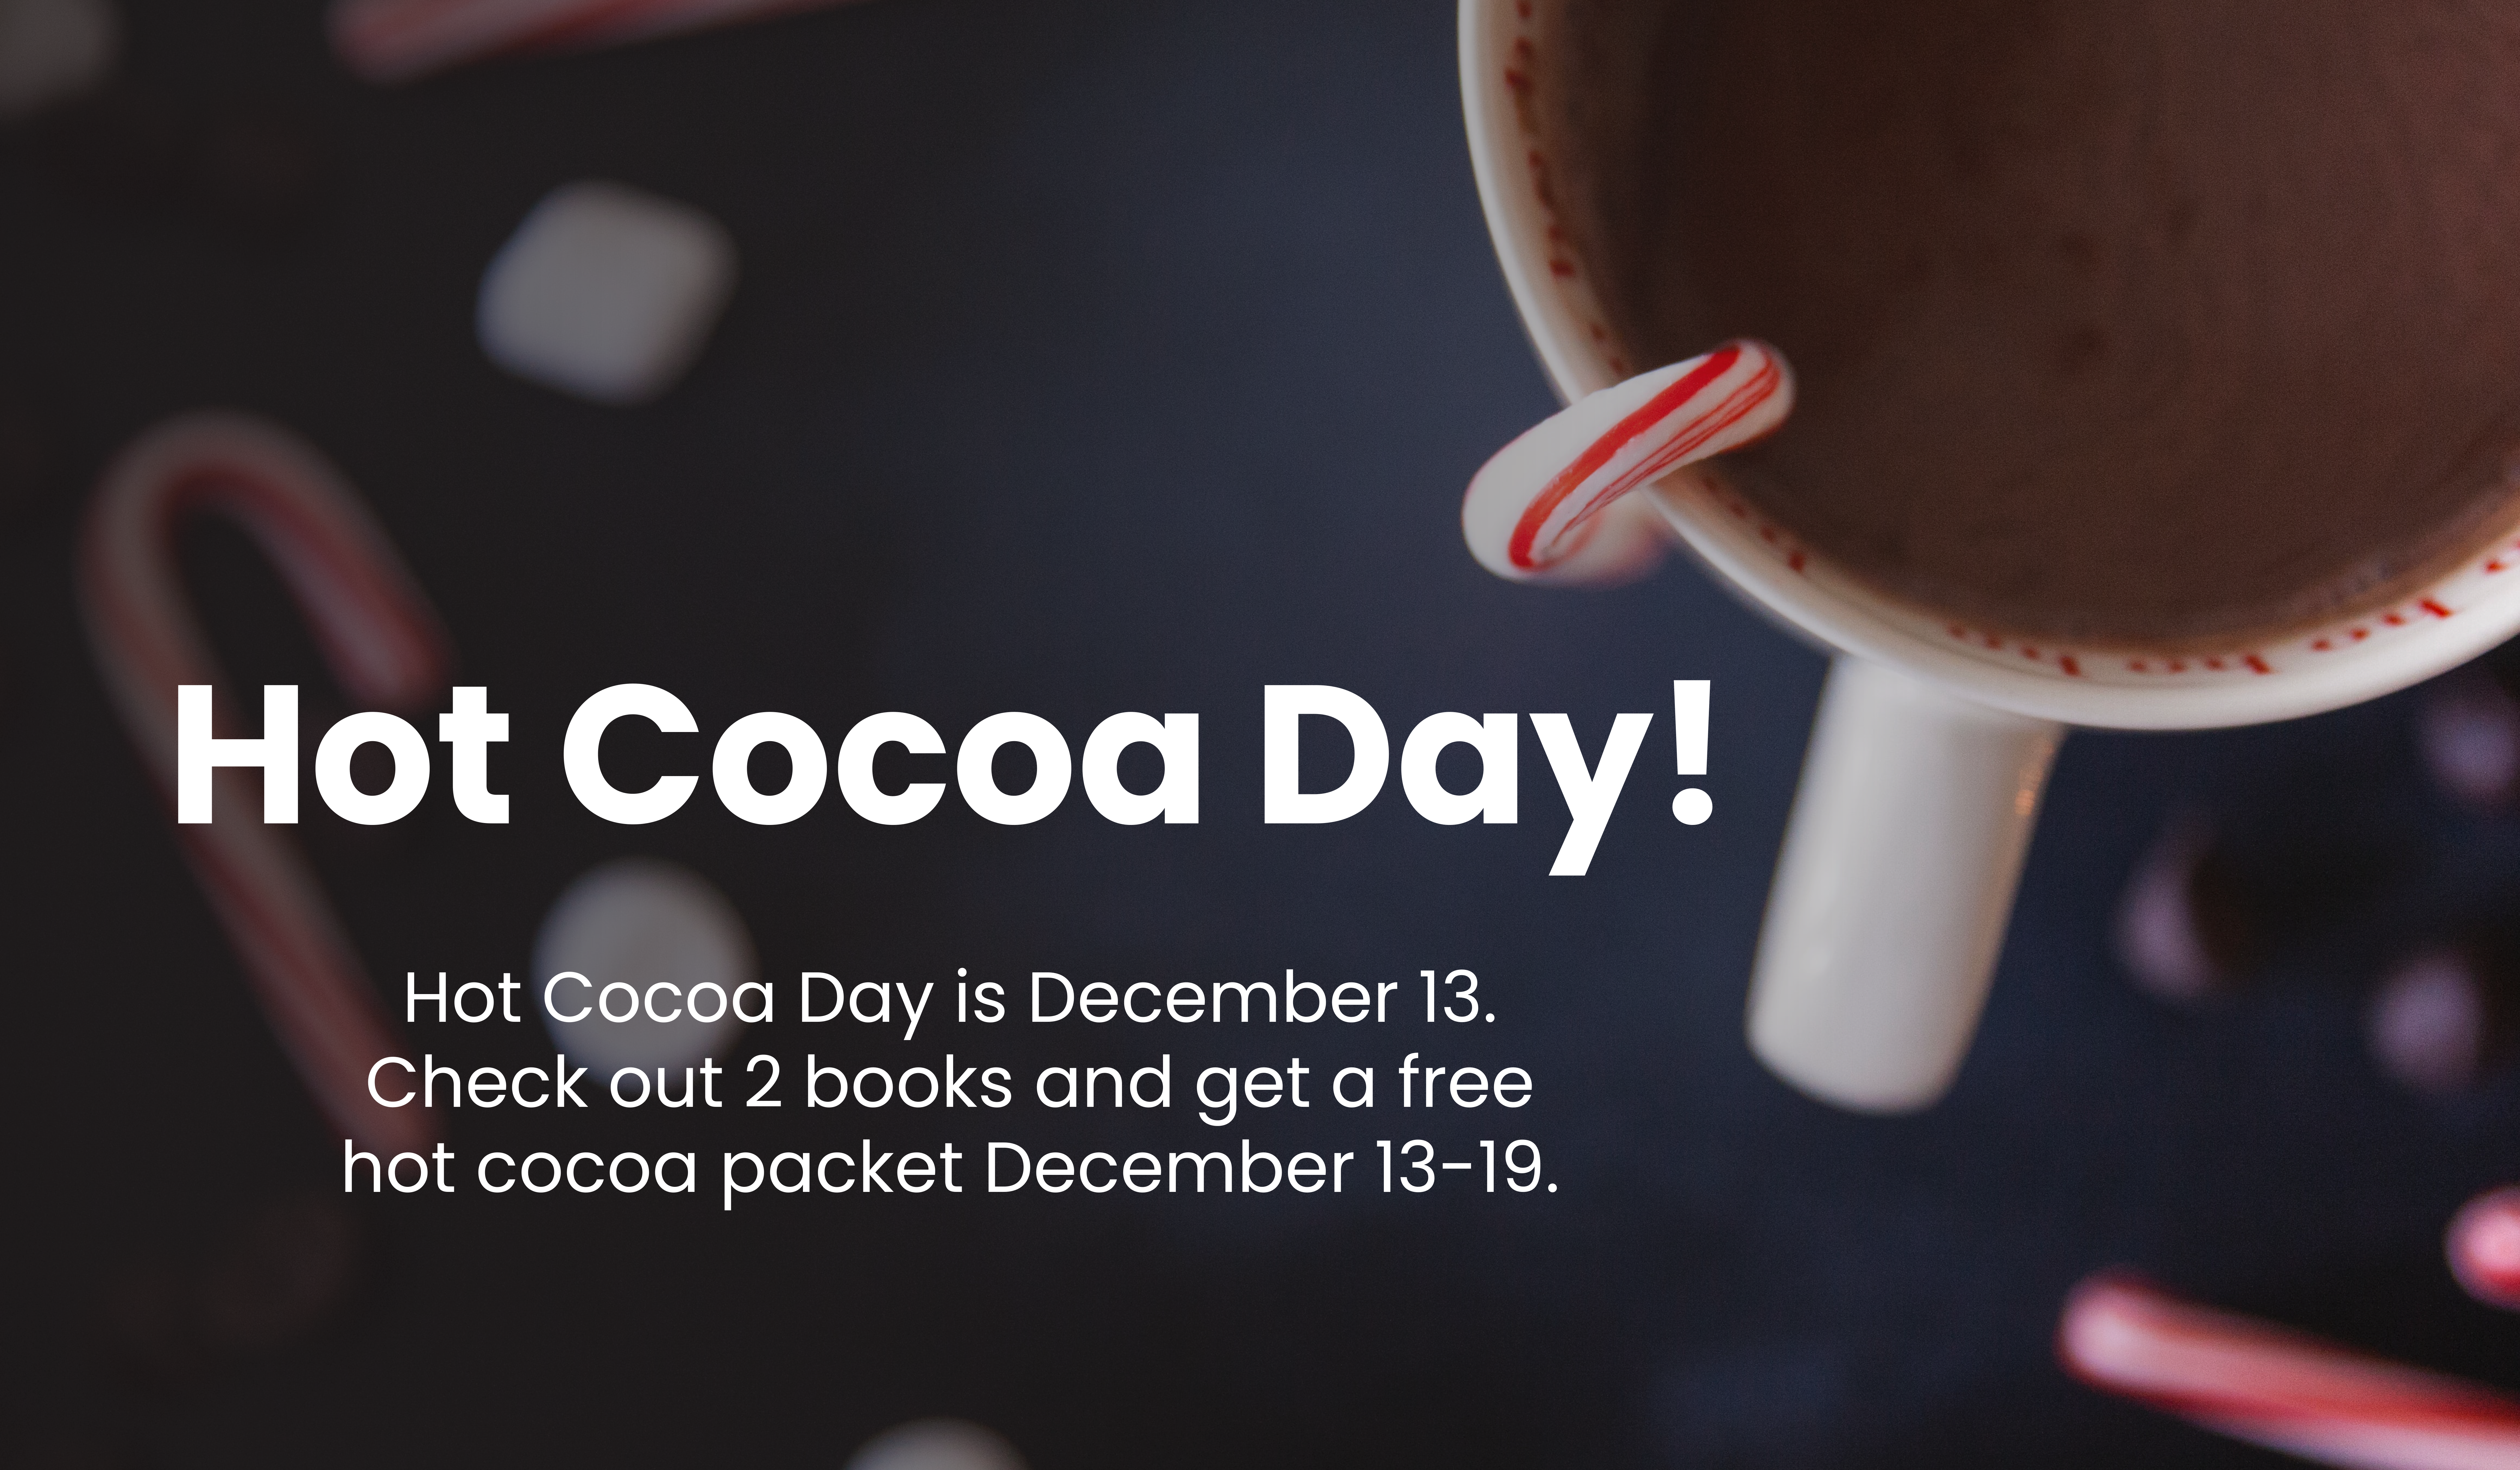 Check out 2 books and receive a hot cocoa packet from December 13-19